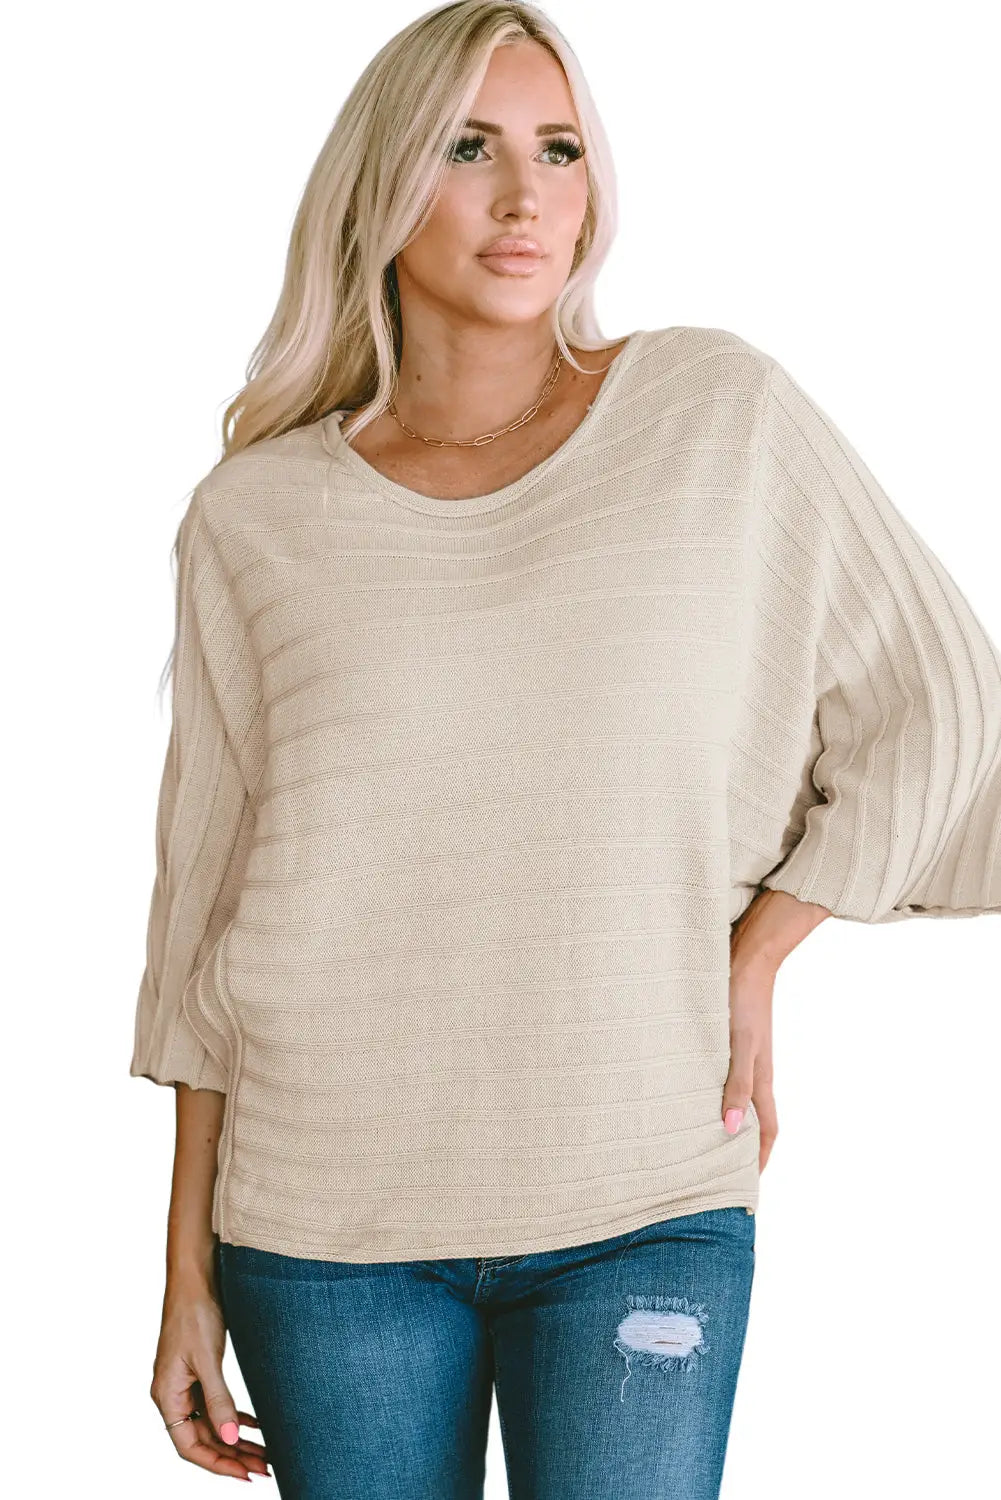 Brown exposed seam ribbed knit dolman top - sweater & cardigans